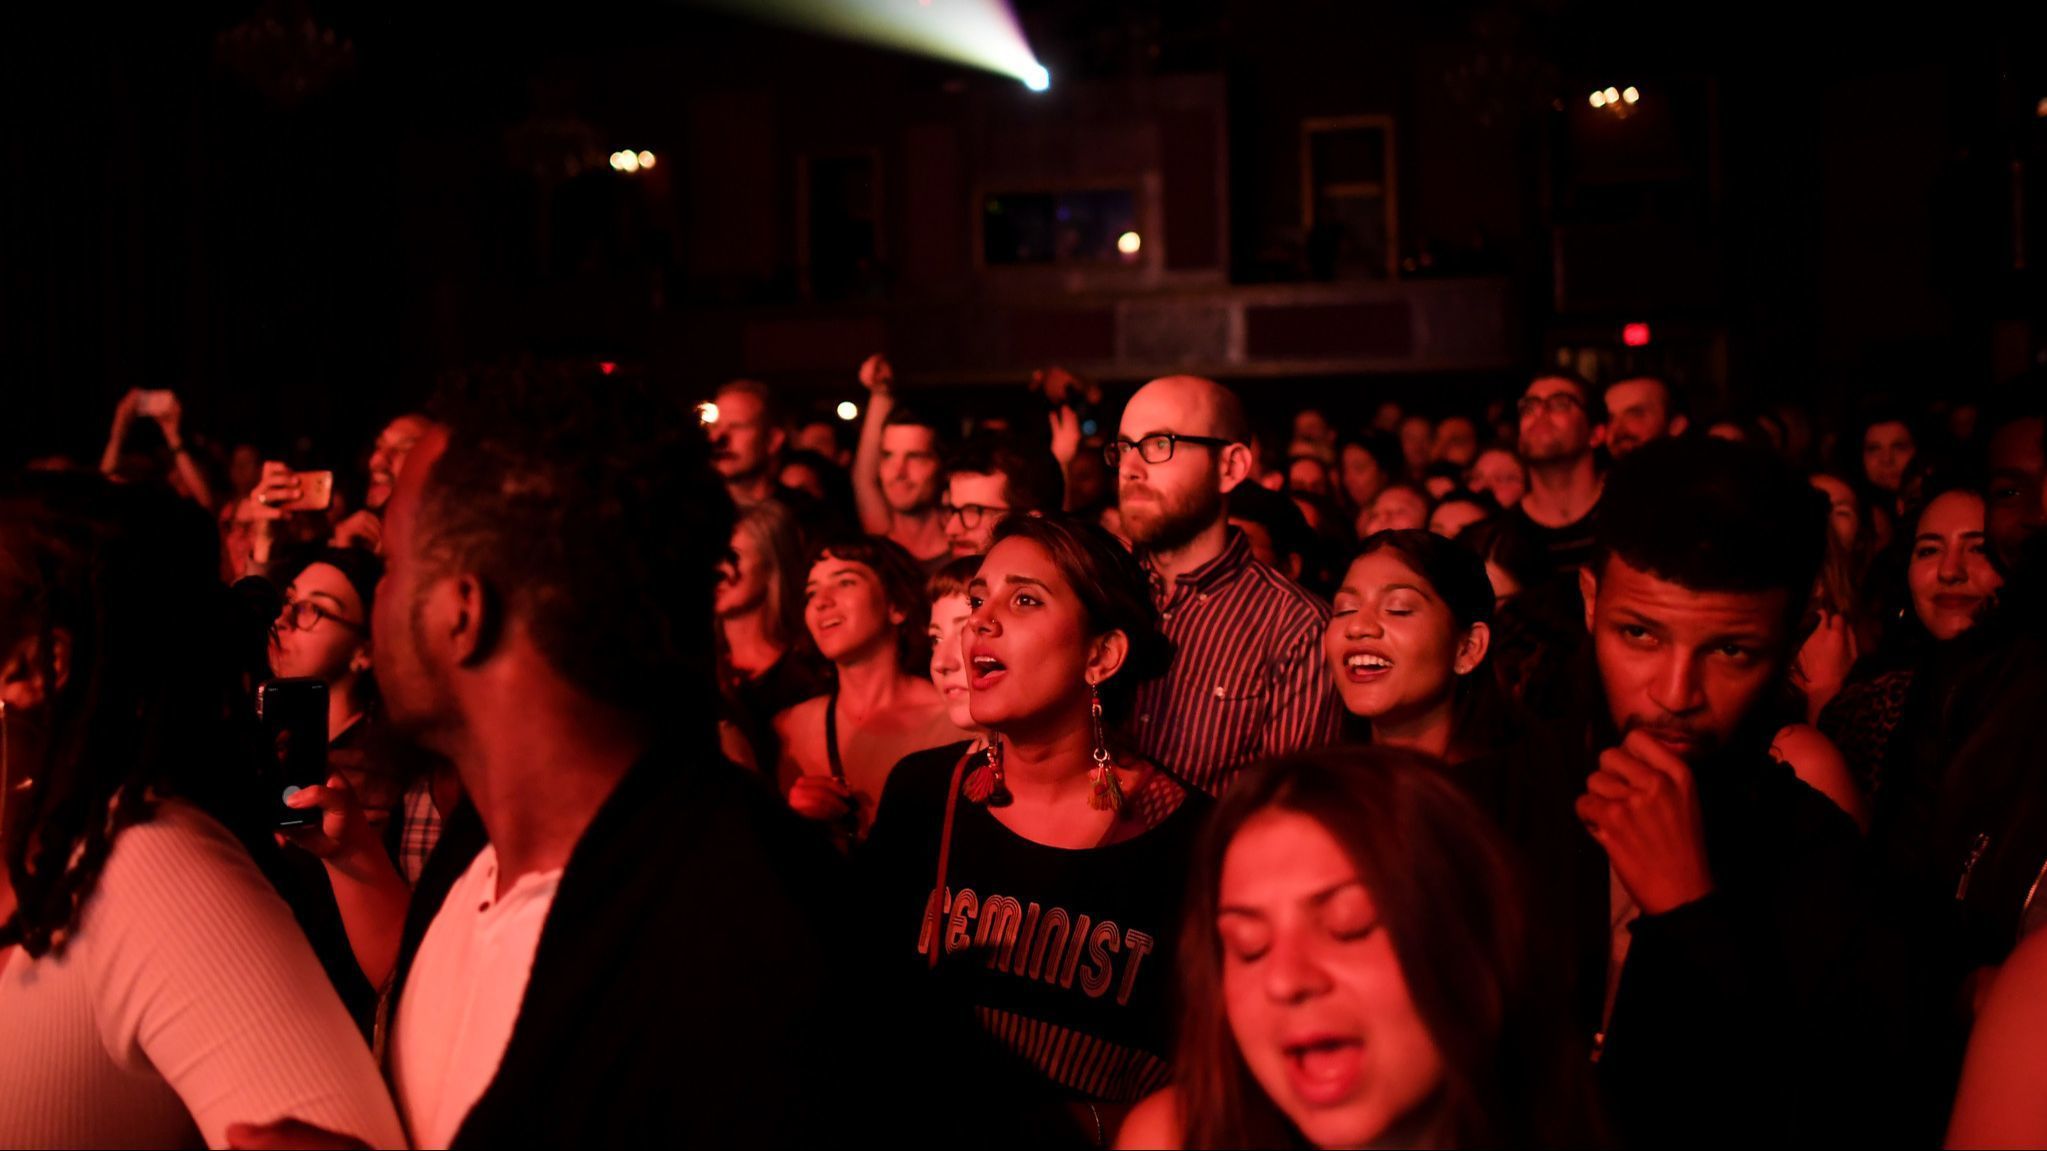 Fans enjoy a concert at the Fillmore in San Francisco.